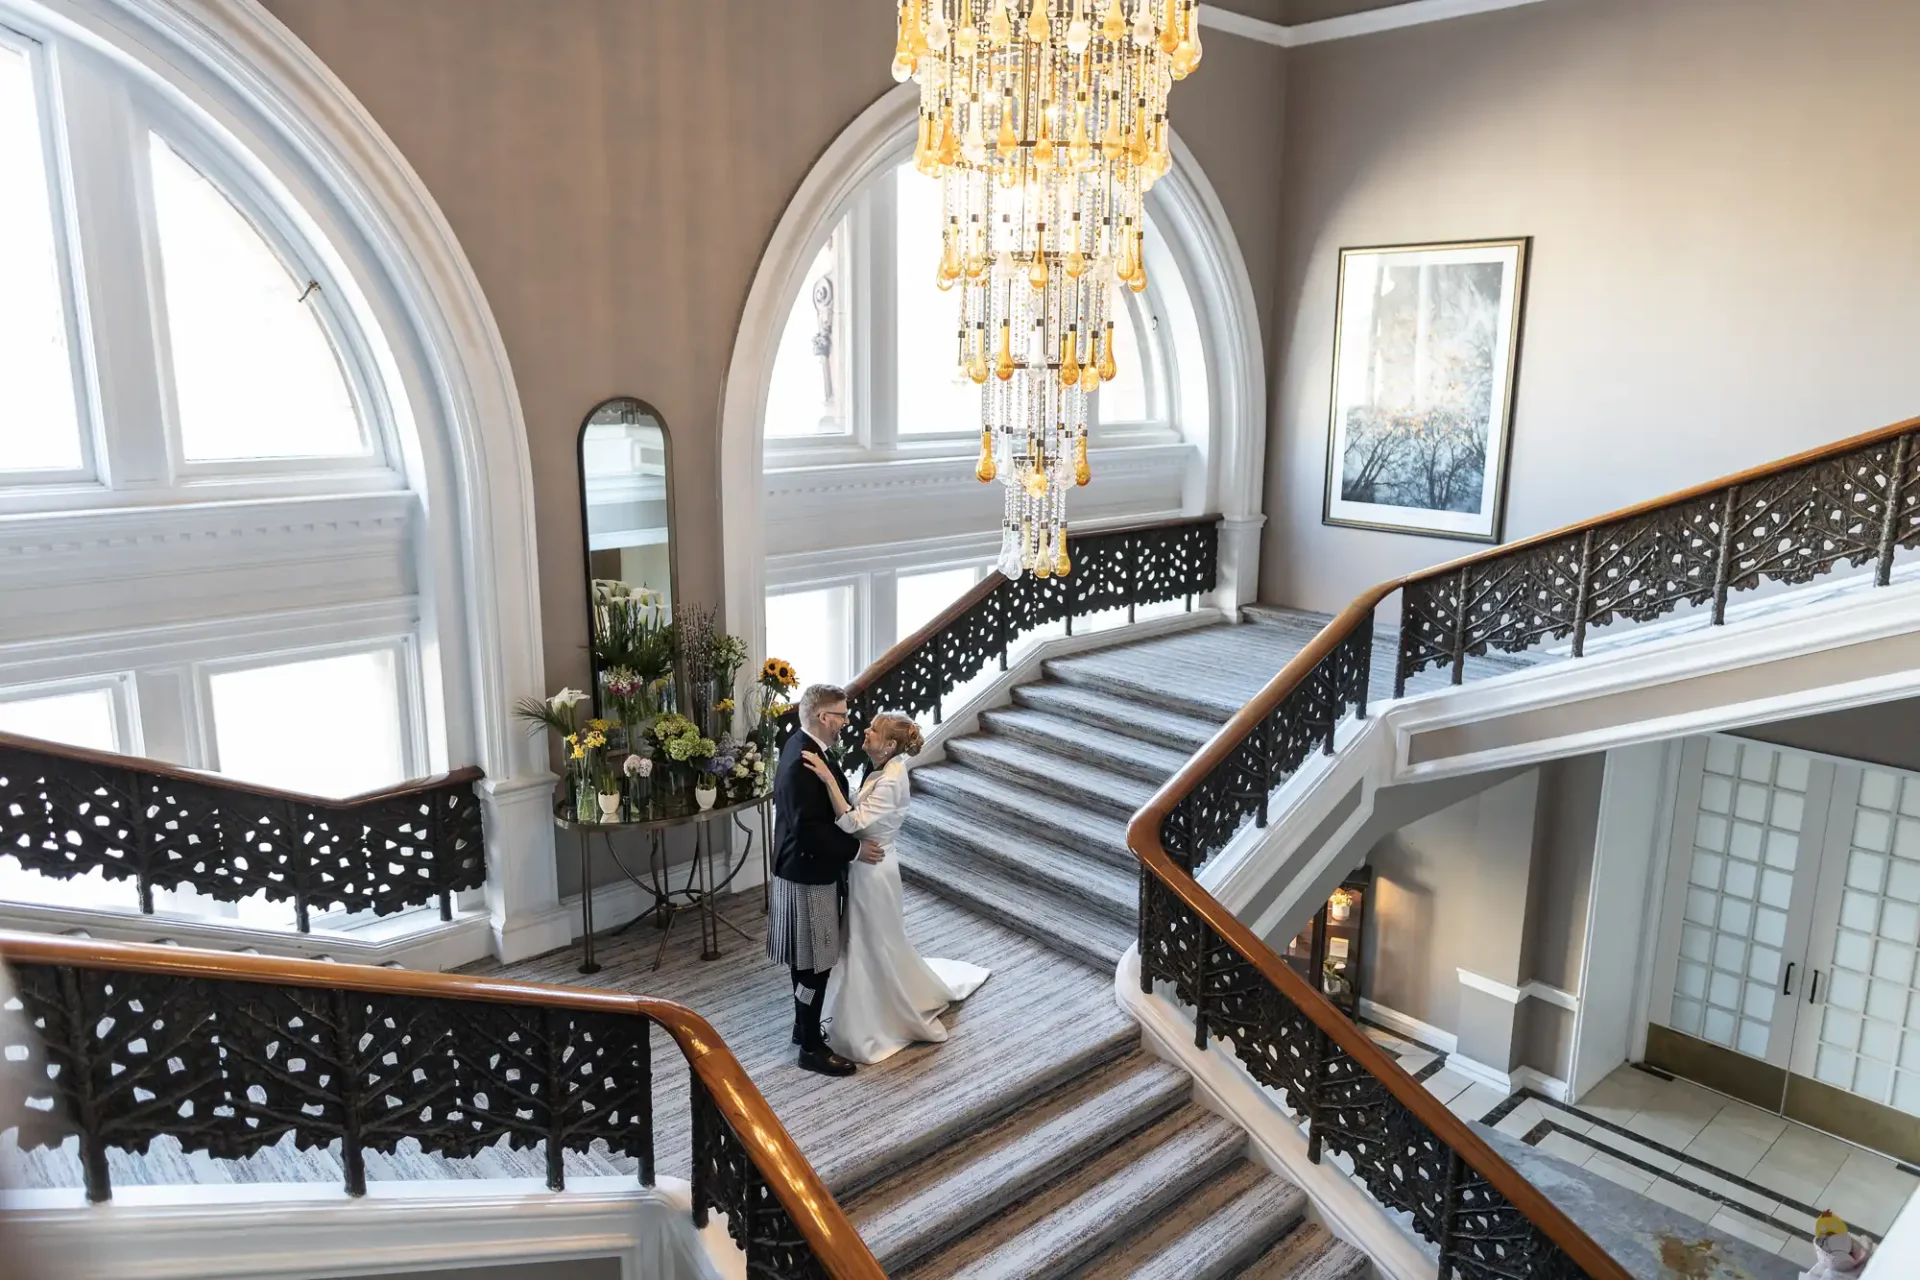 A couple stands on a grand staircase under an ornate chandelier in an elegant venue with arched windows and decorative railings.